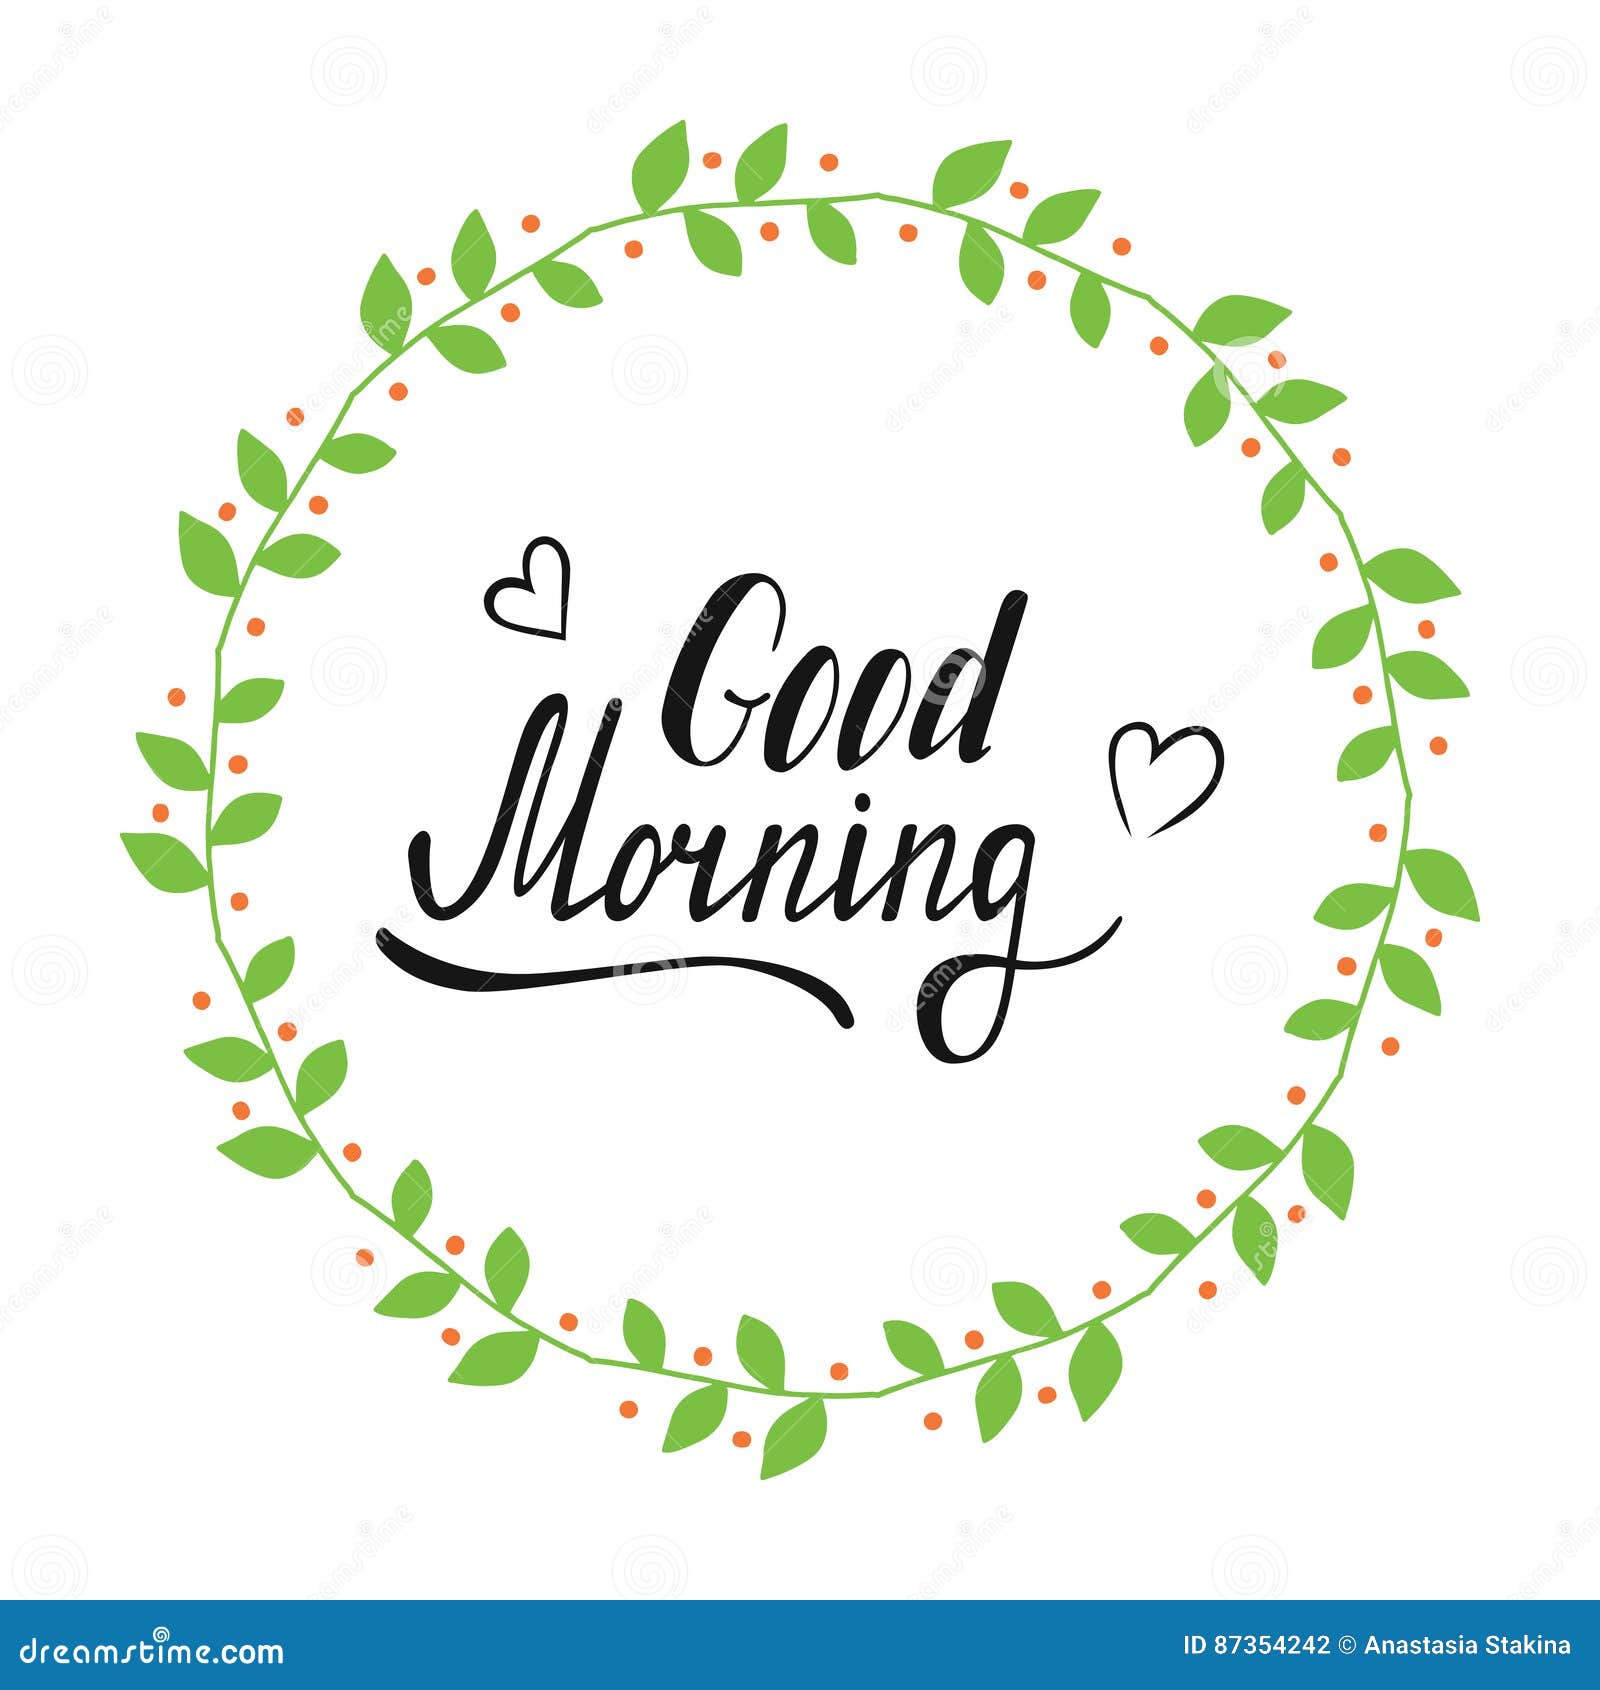 Good morning wreath color stock vector. Illustration of cute ...